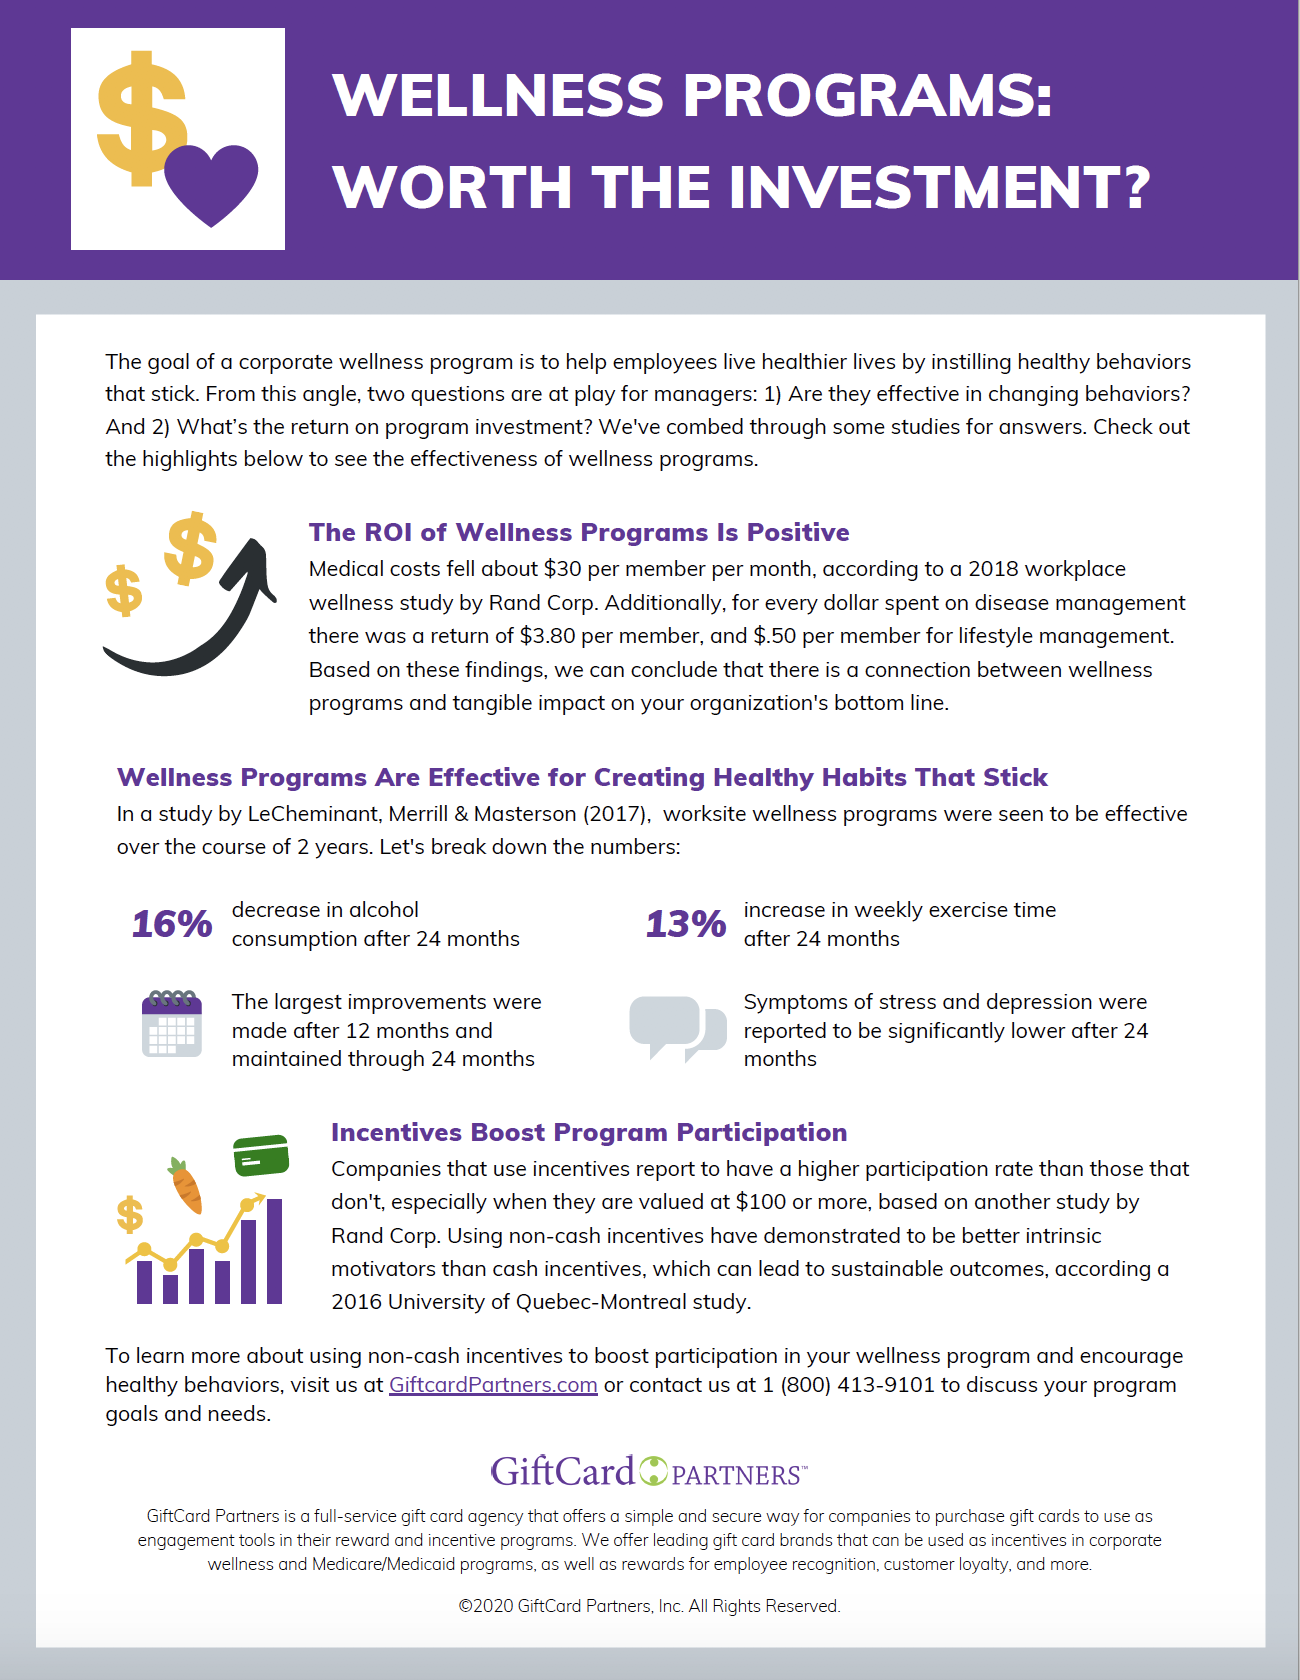 Wellness Programs: Worth the Investment? Infographic